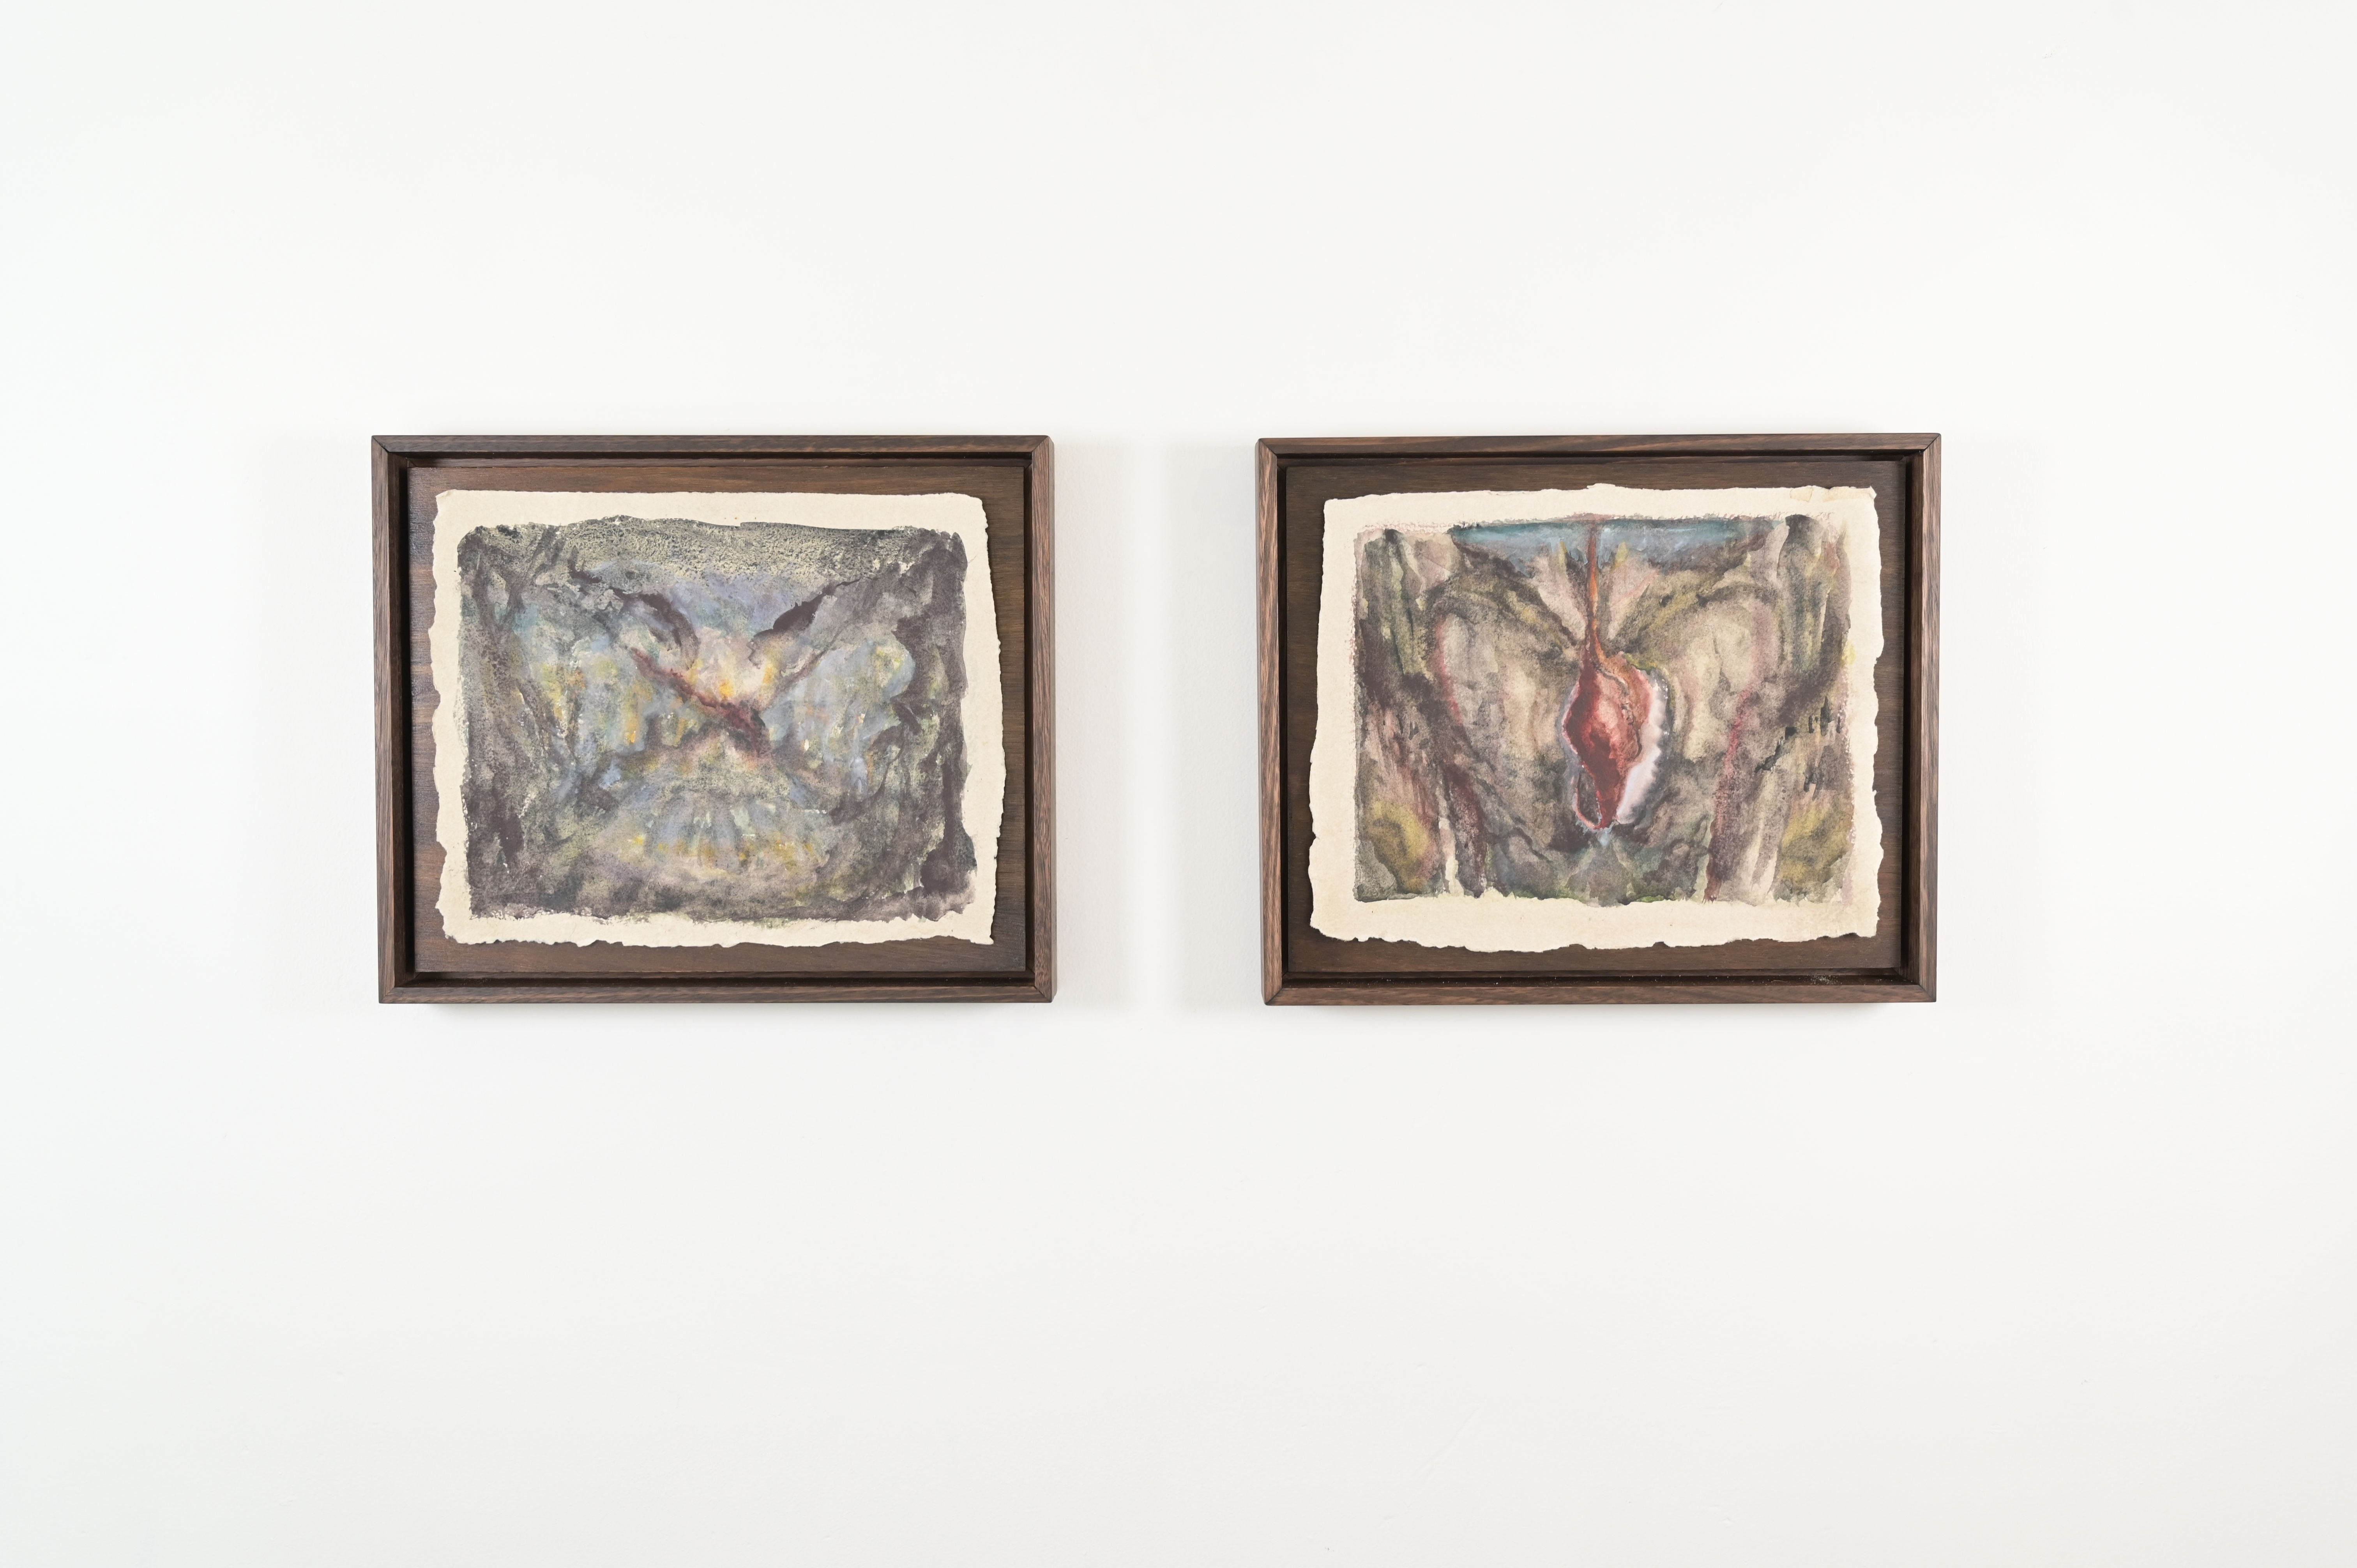 left: Victoria Stolz, ‘Vision ii (evening light)’ 2020, framed watercolour on handmade paper; right: Victoria Stoltz, ‘Vision viii (leaf)’ 2020, framed watercolour on handmade paper. Photograph: Storm Gold.